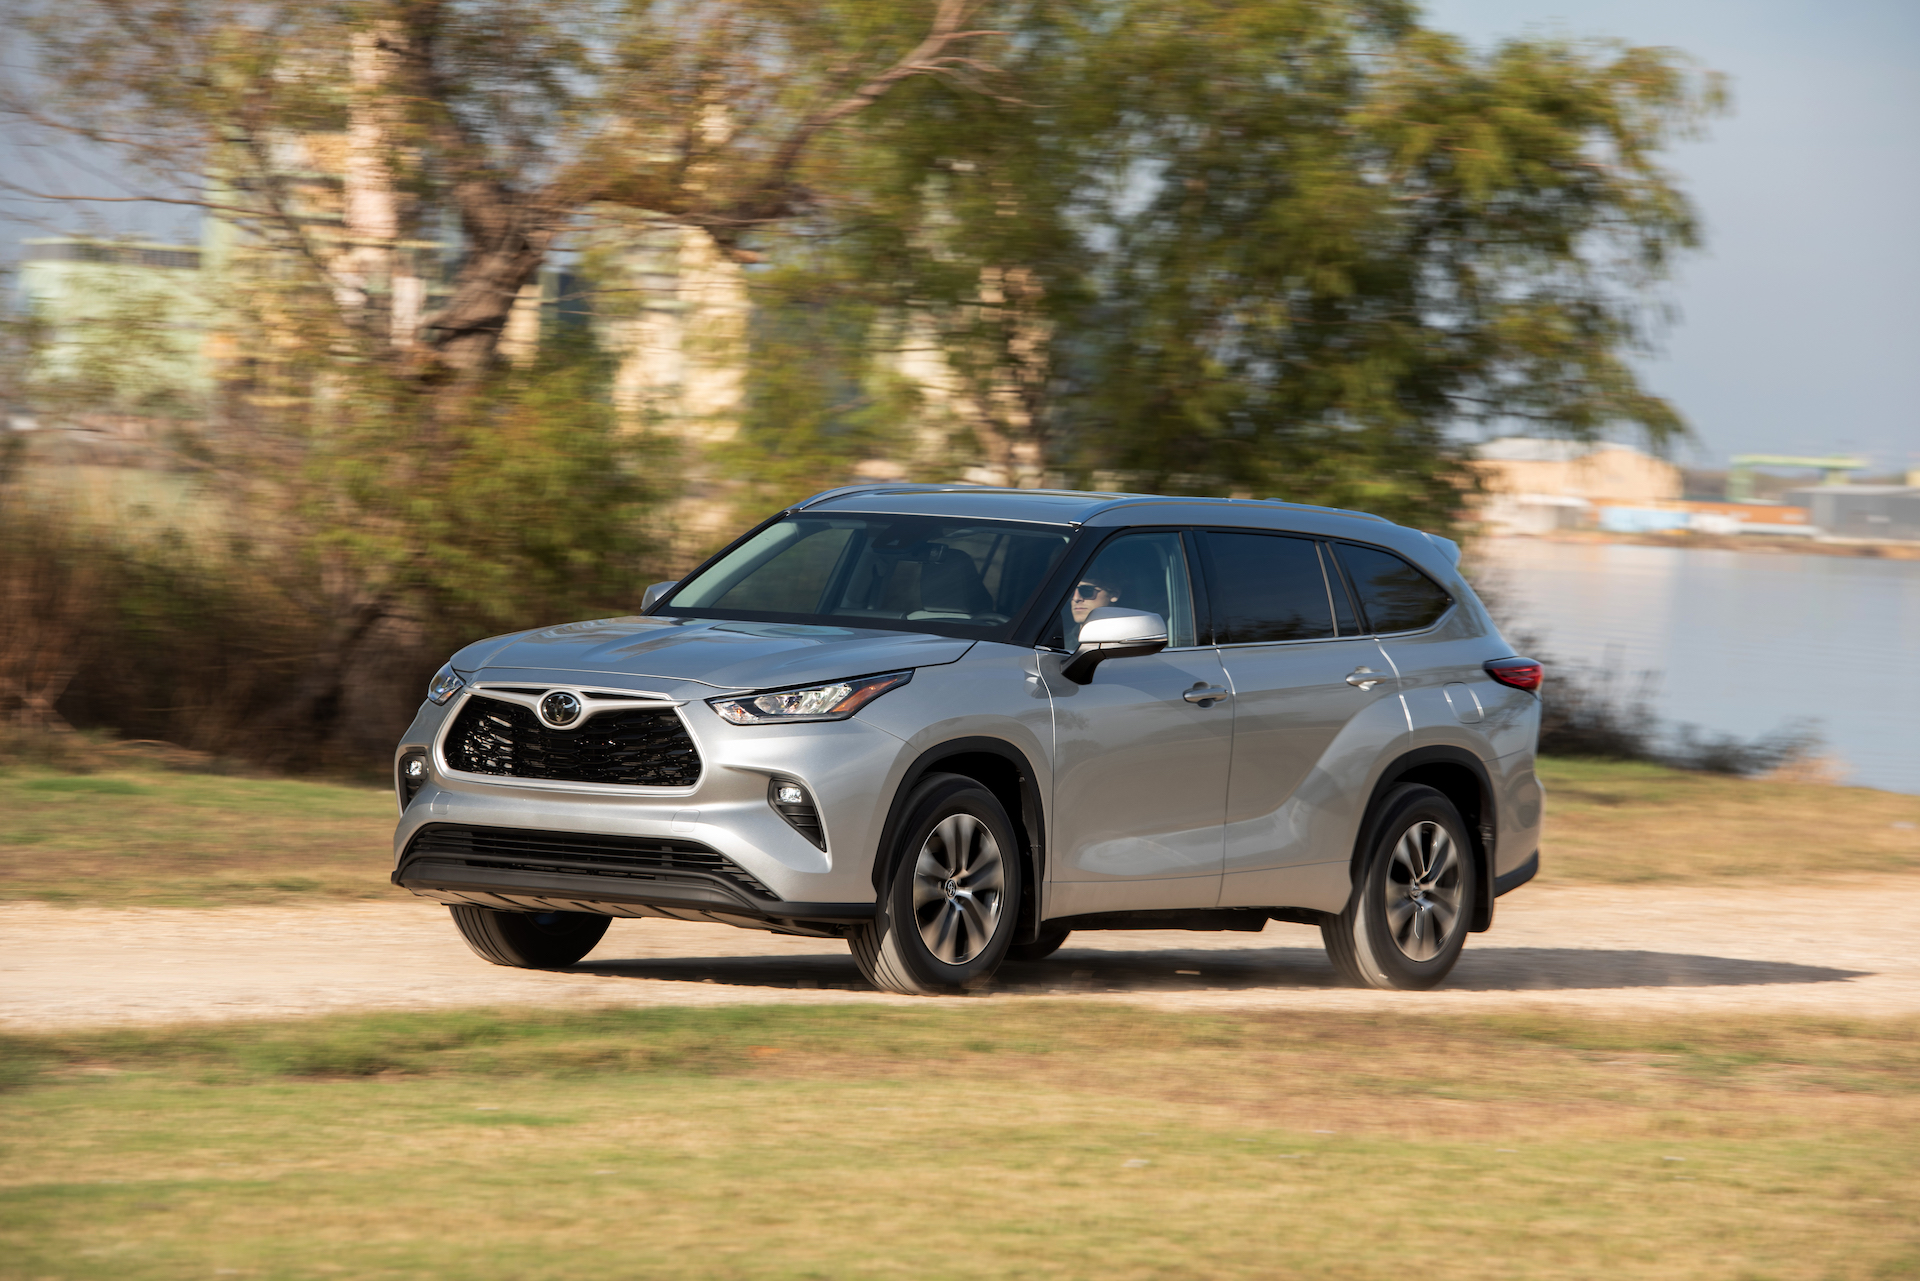 How Much Does a Toyota Highlander Weight?